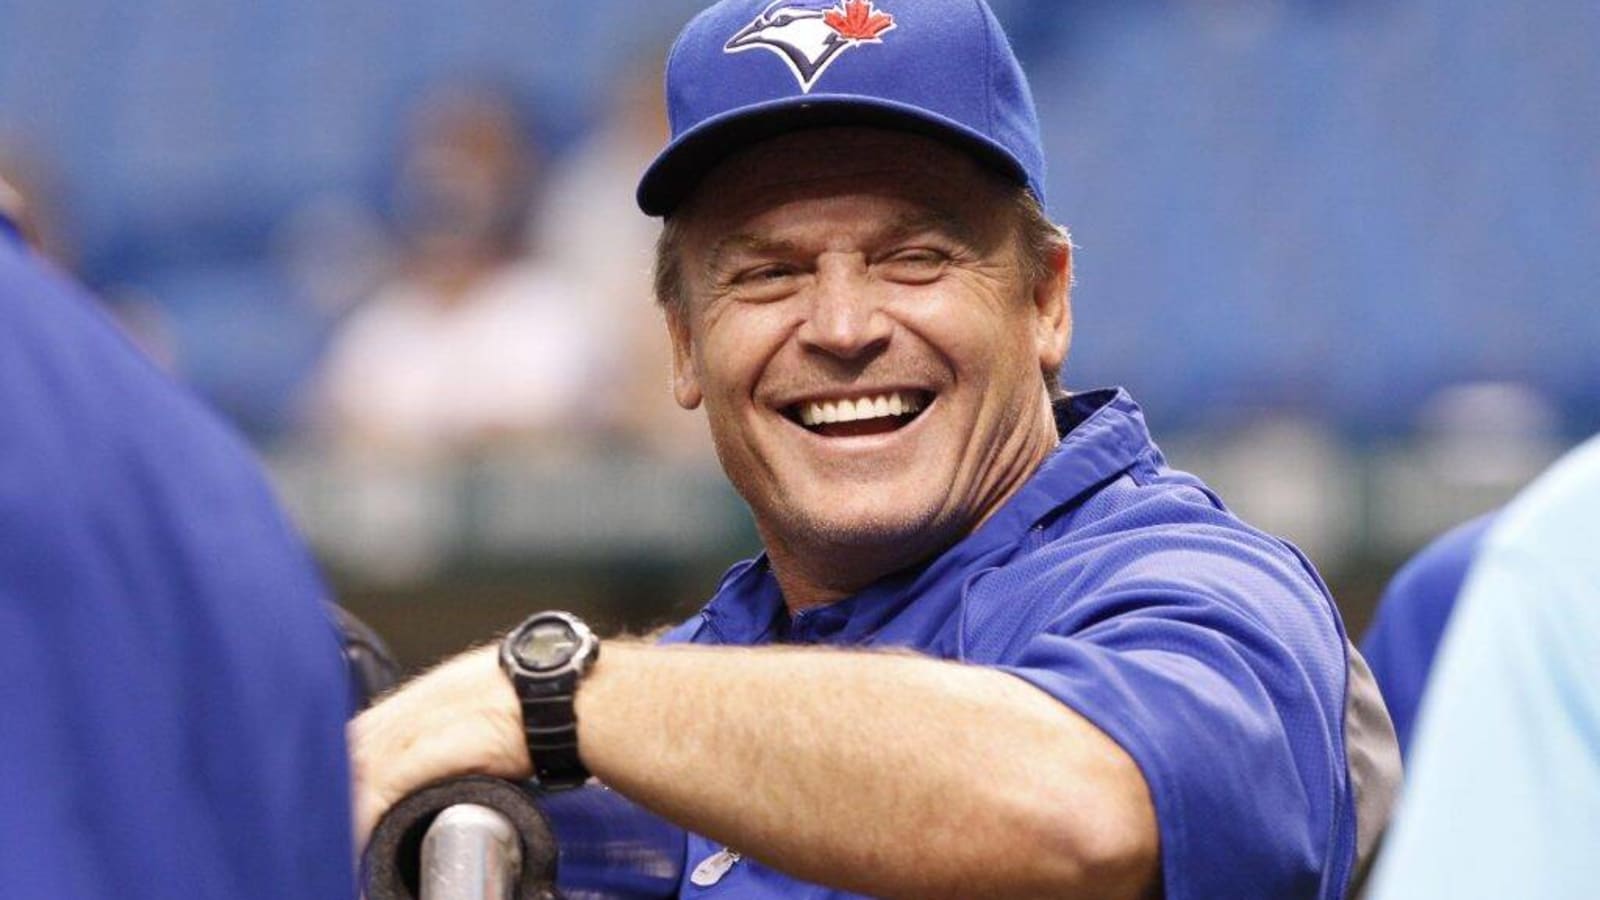 This day in history: John Gibbons hits his first (and only) Major League home run